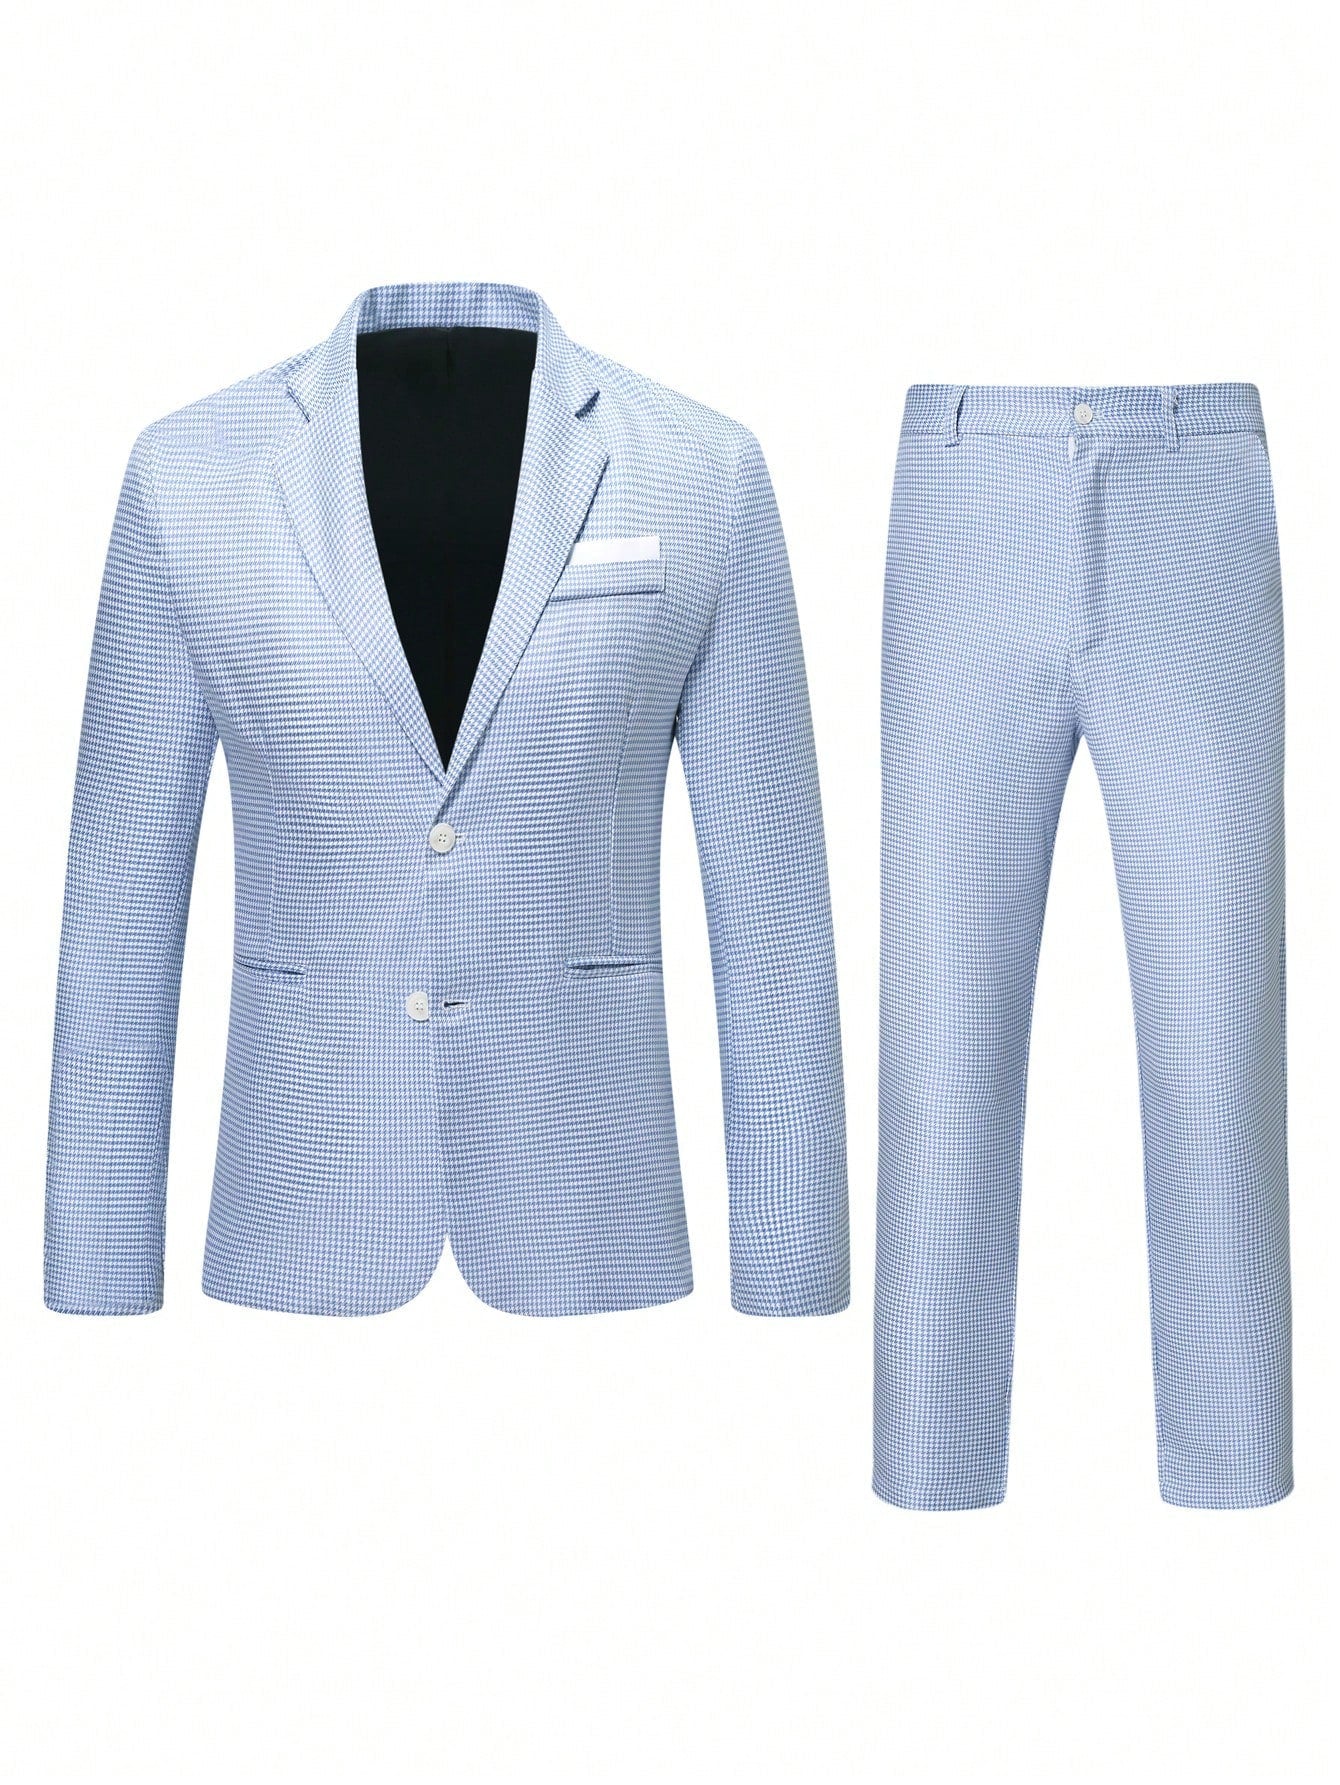 Manfinity Mode Men's Single-breasted Suit Jacket With Lapel Collar And Suit Pants